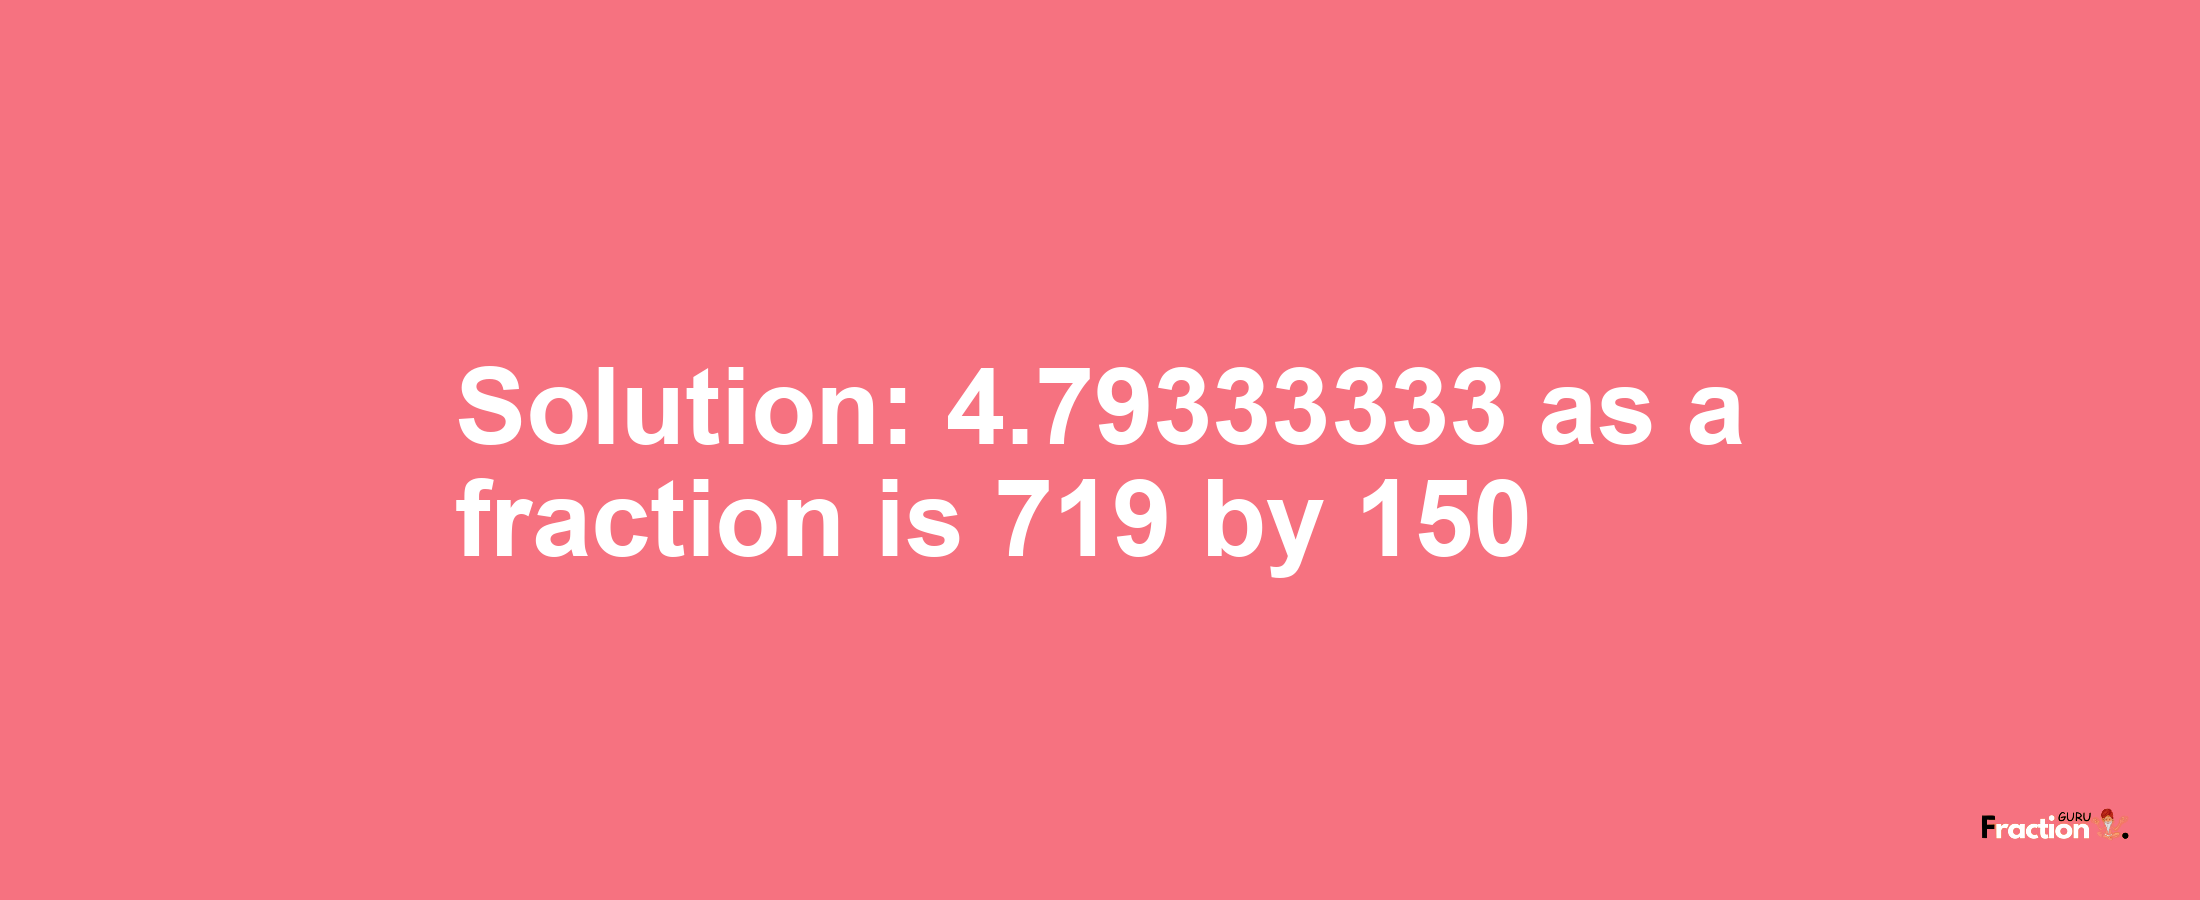 Solution:4.79333333 as a fraction is 719/150